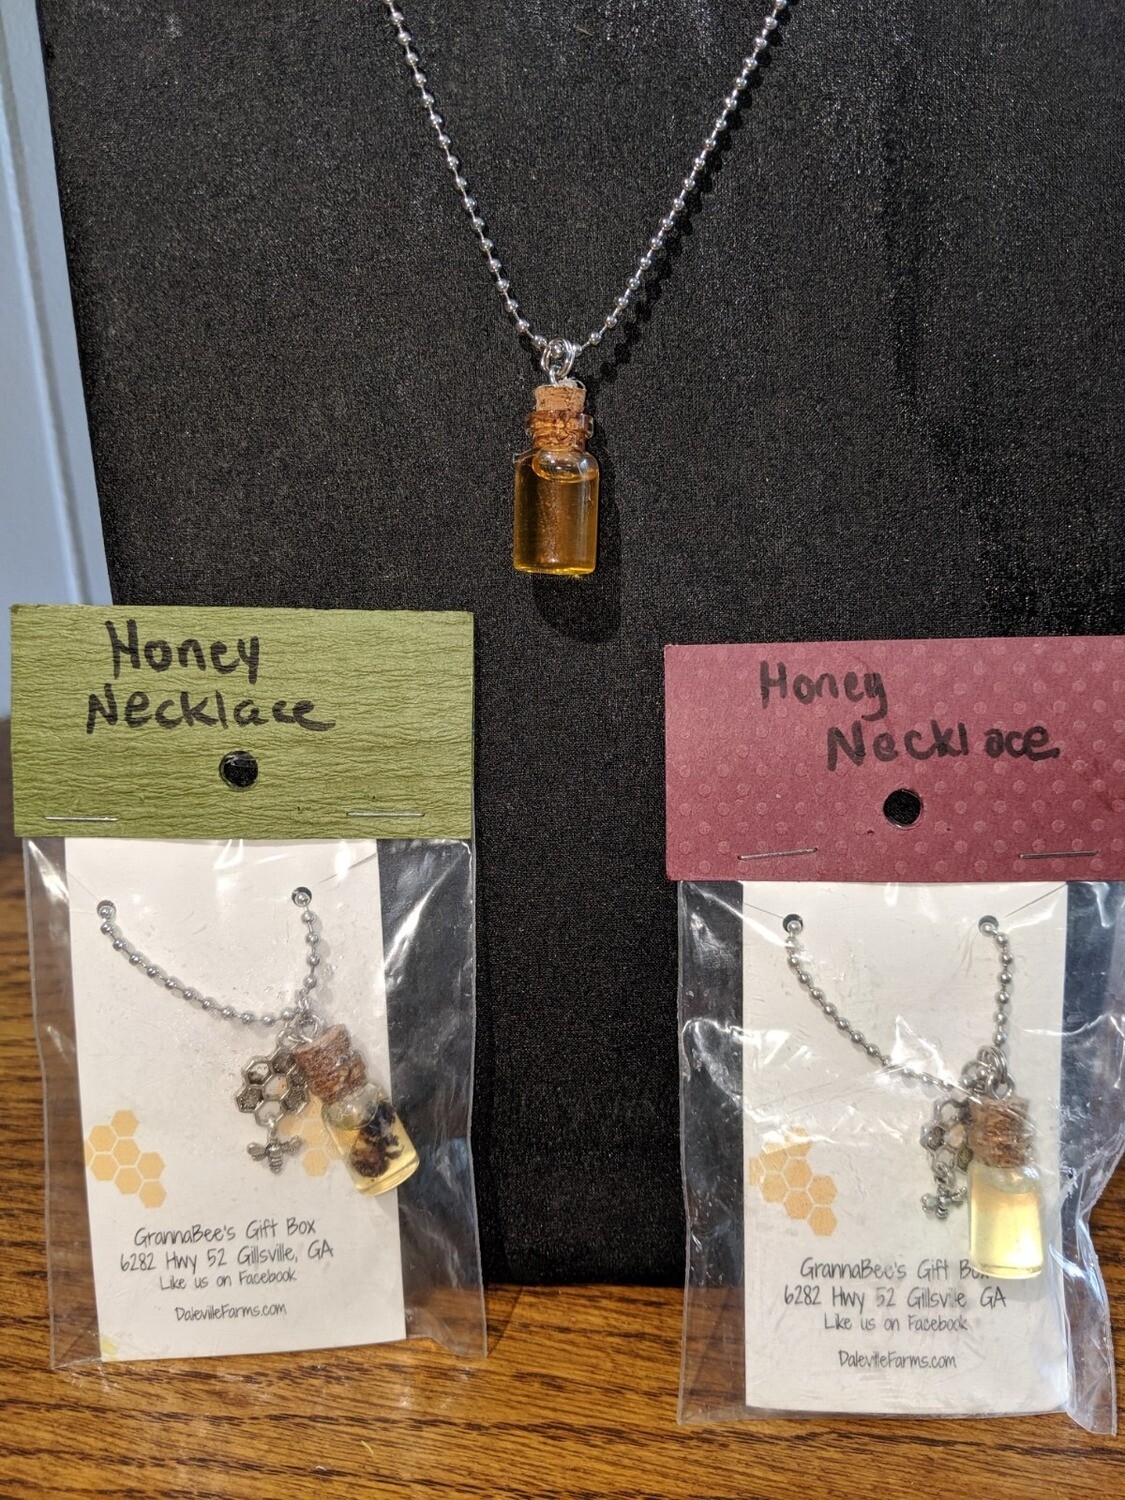 Honey Necklace with Honeycomb Charm